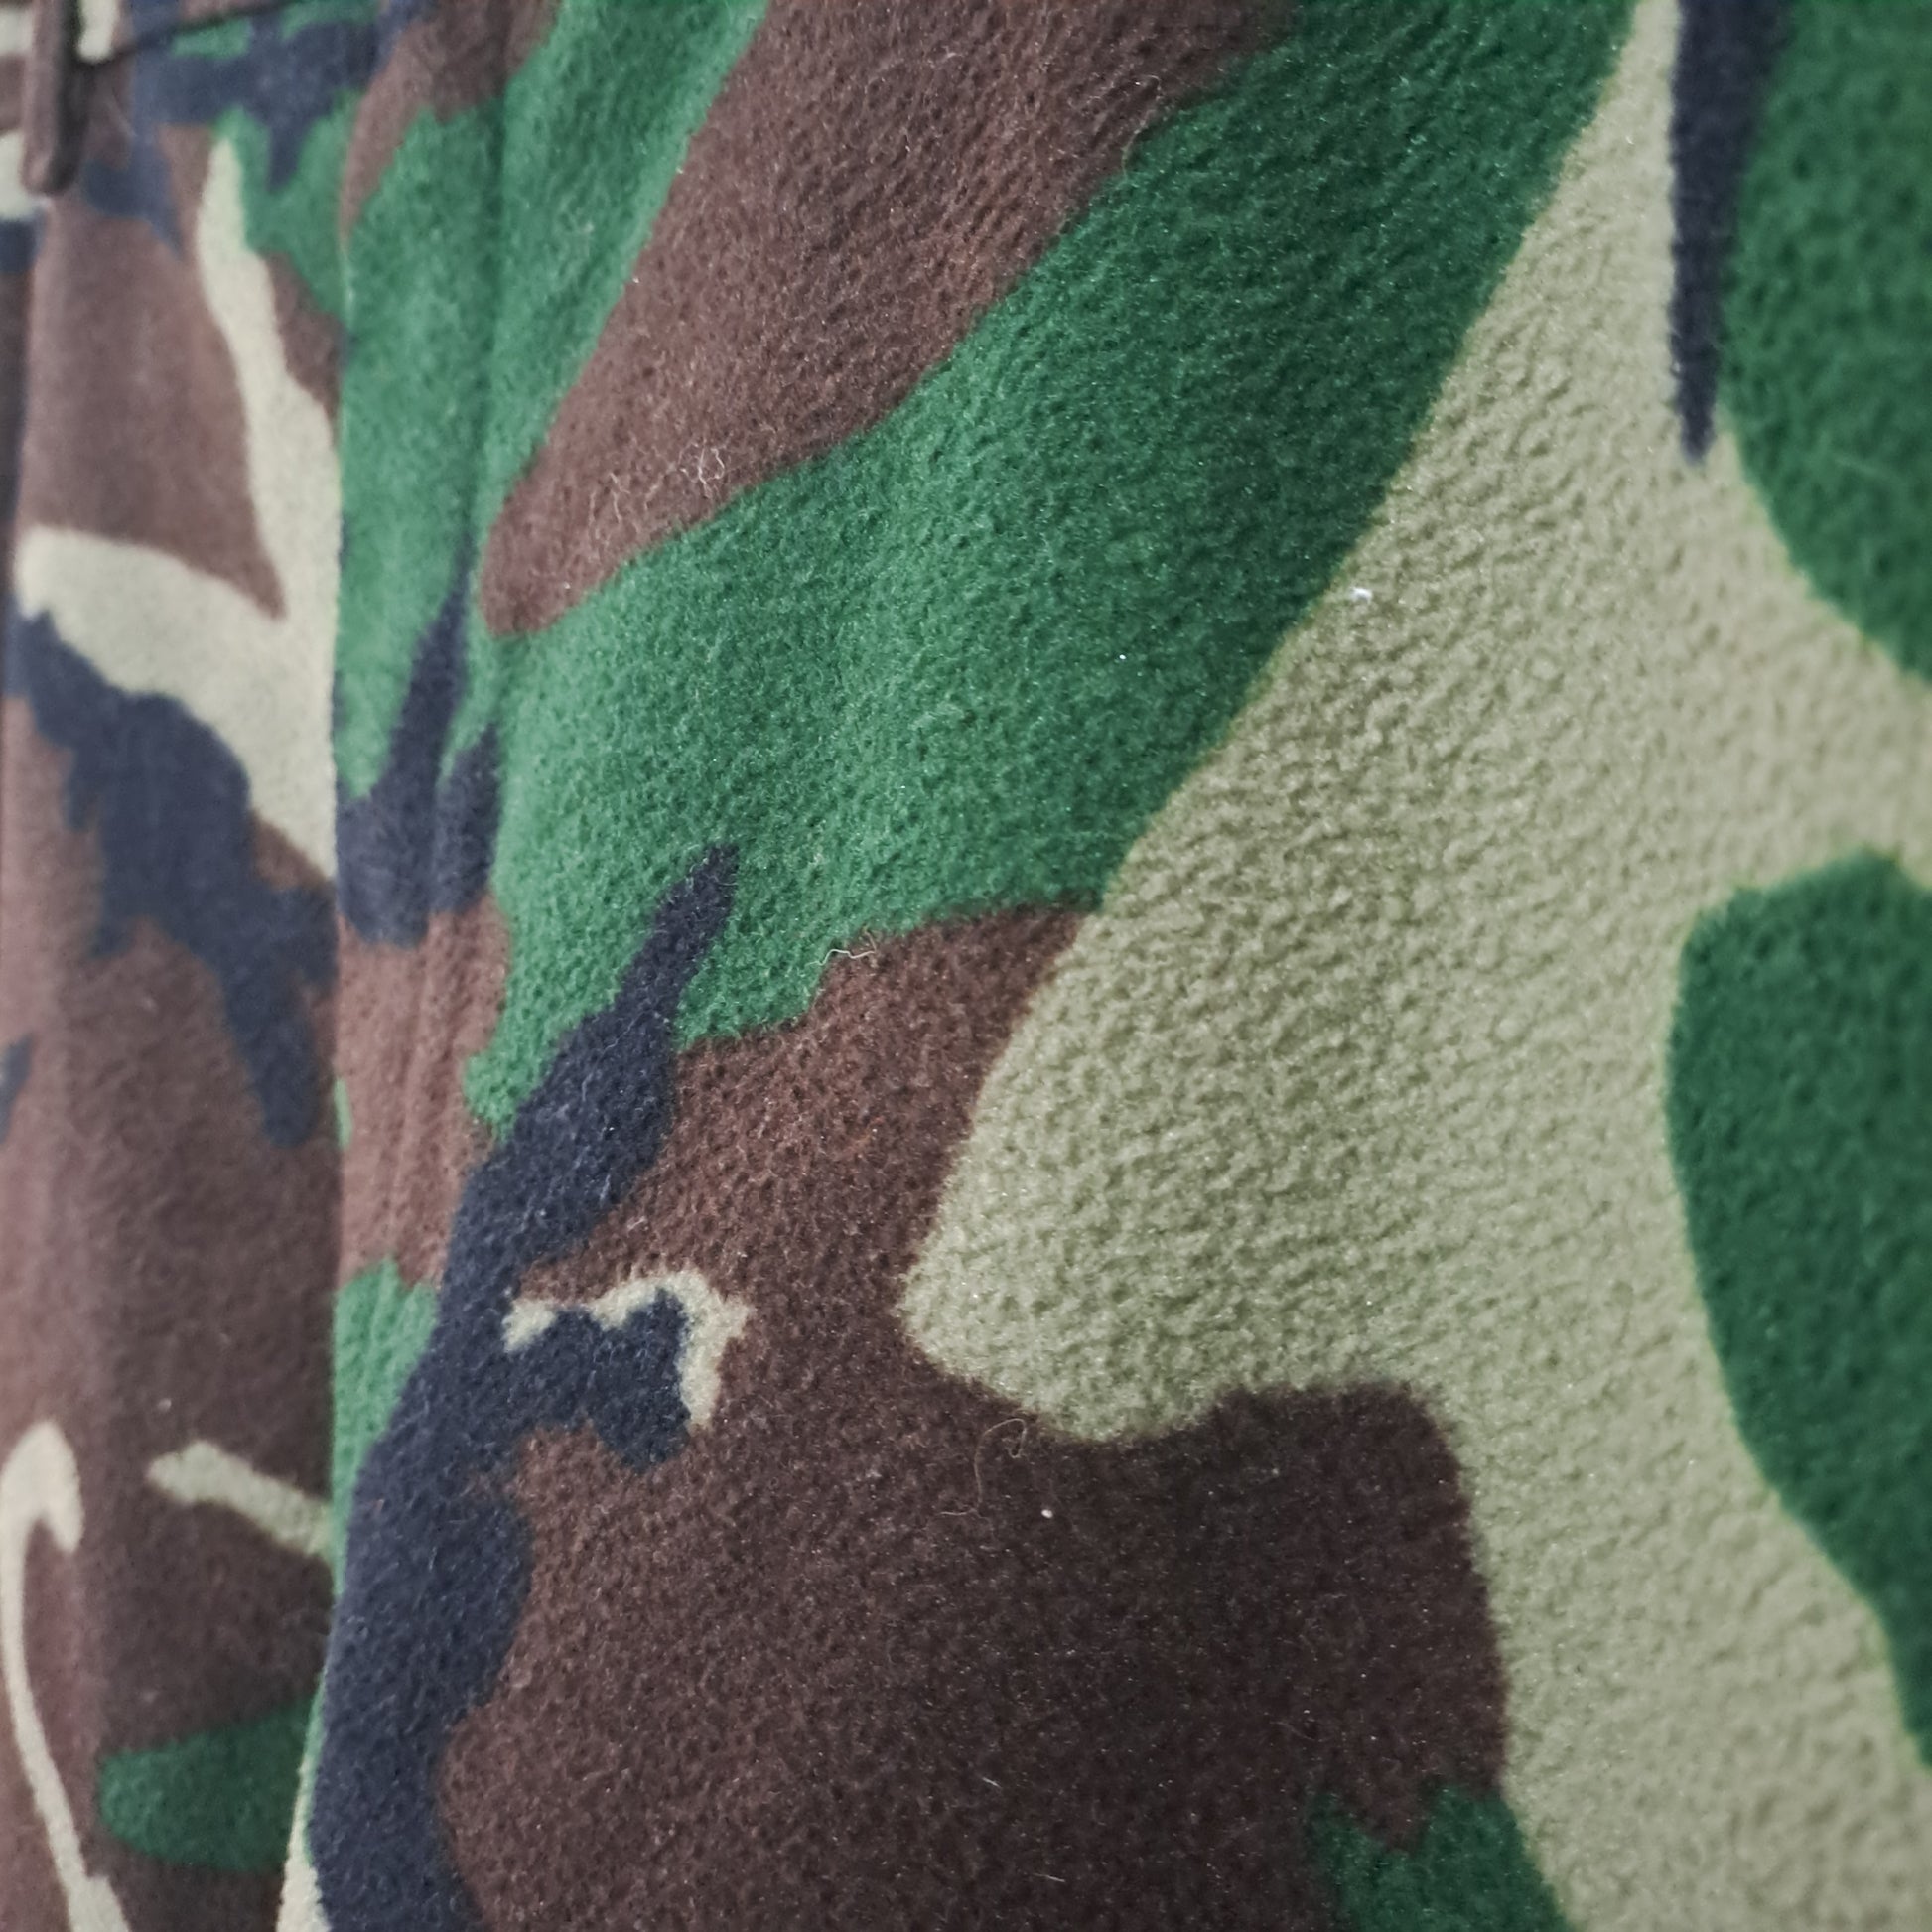 American army camouflage style pants